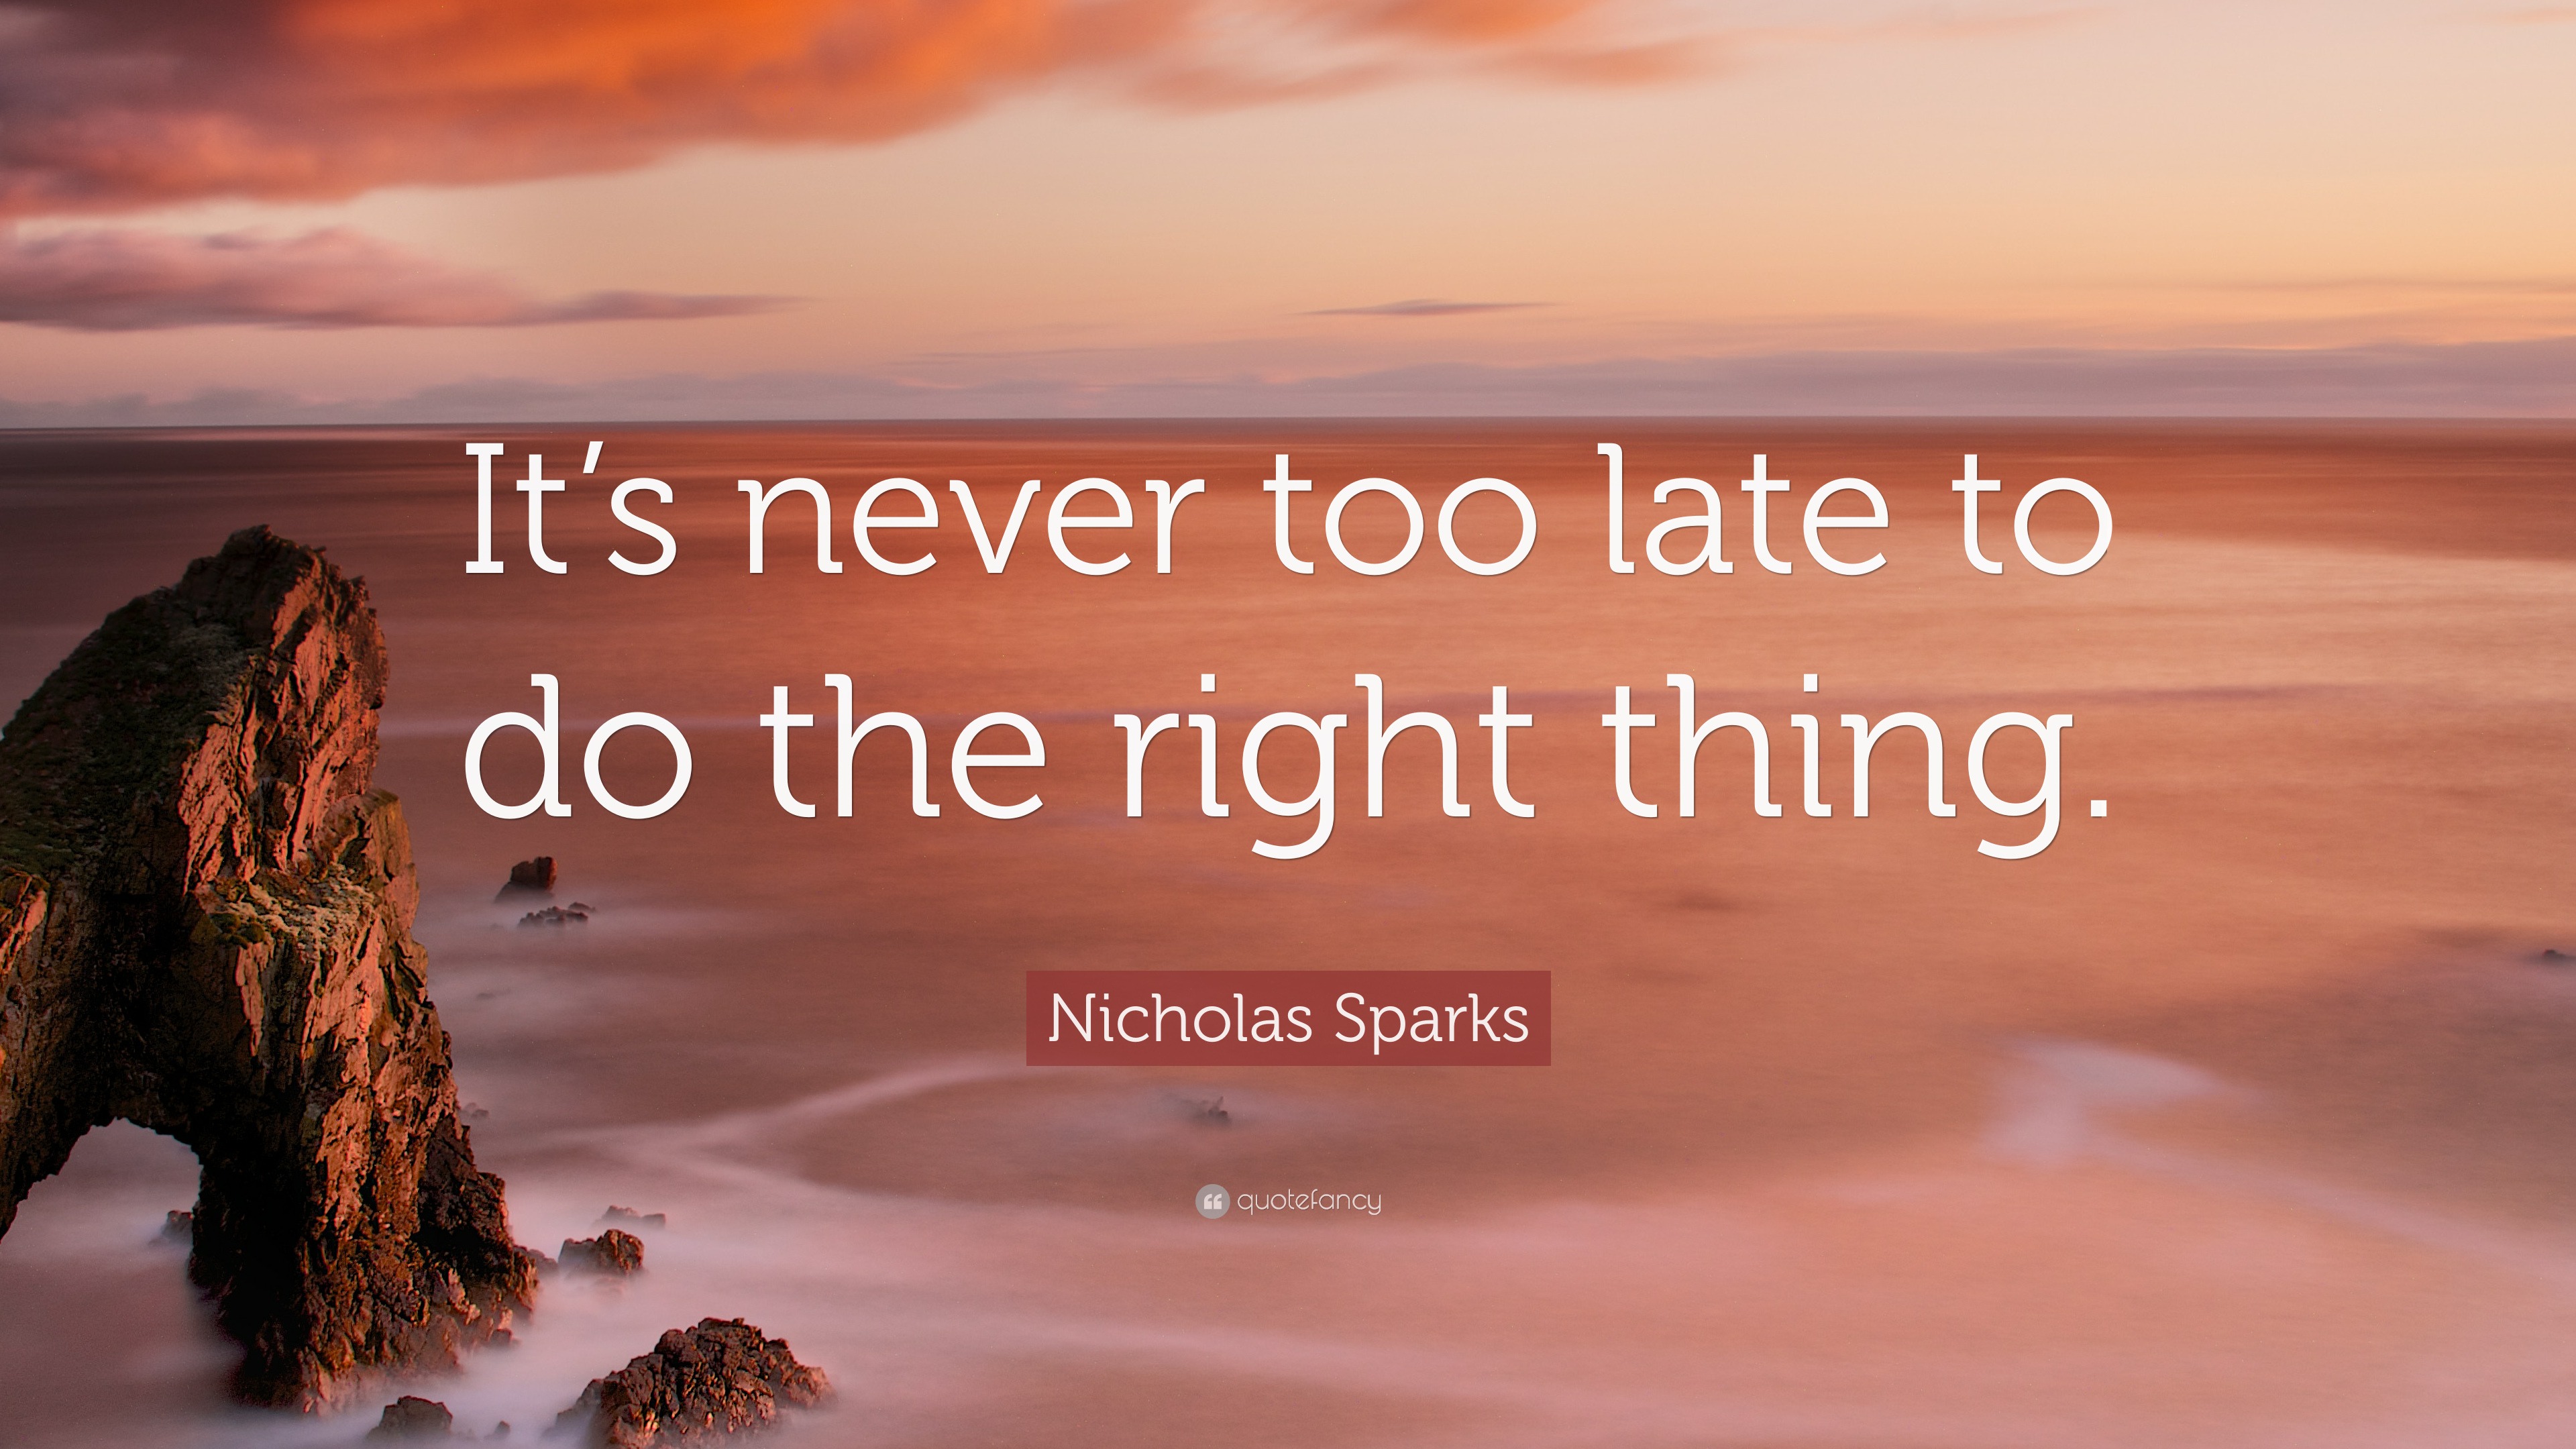 Nicholas Sparks Quote “its Never Too Late To Do The Right Thing”